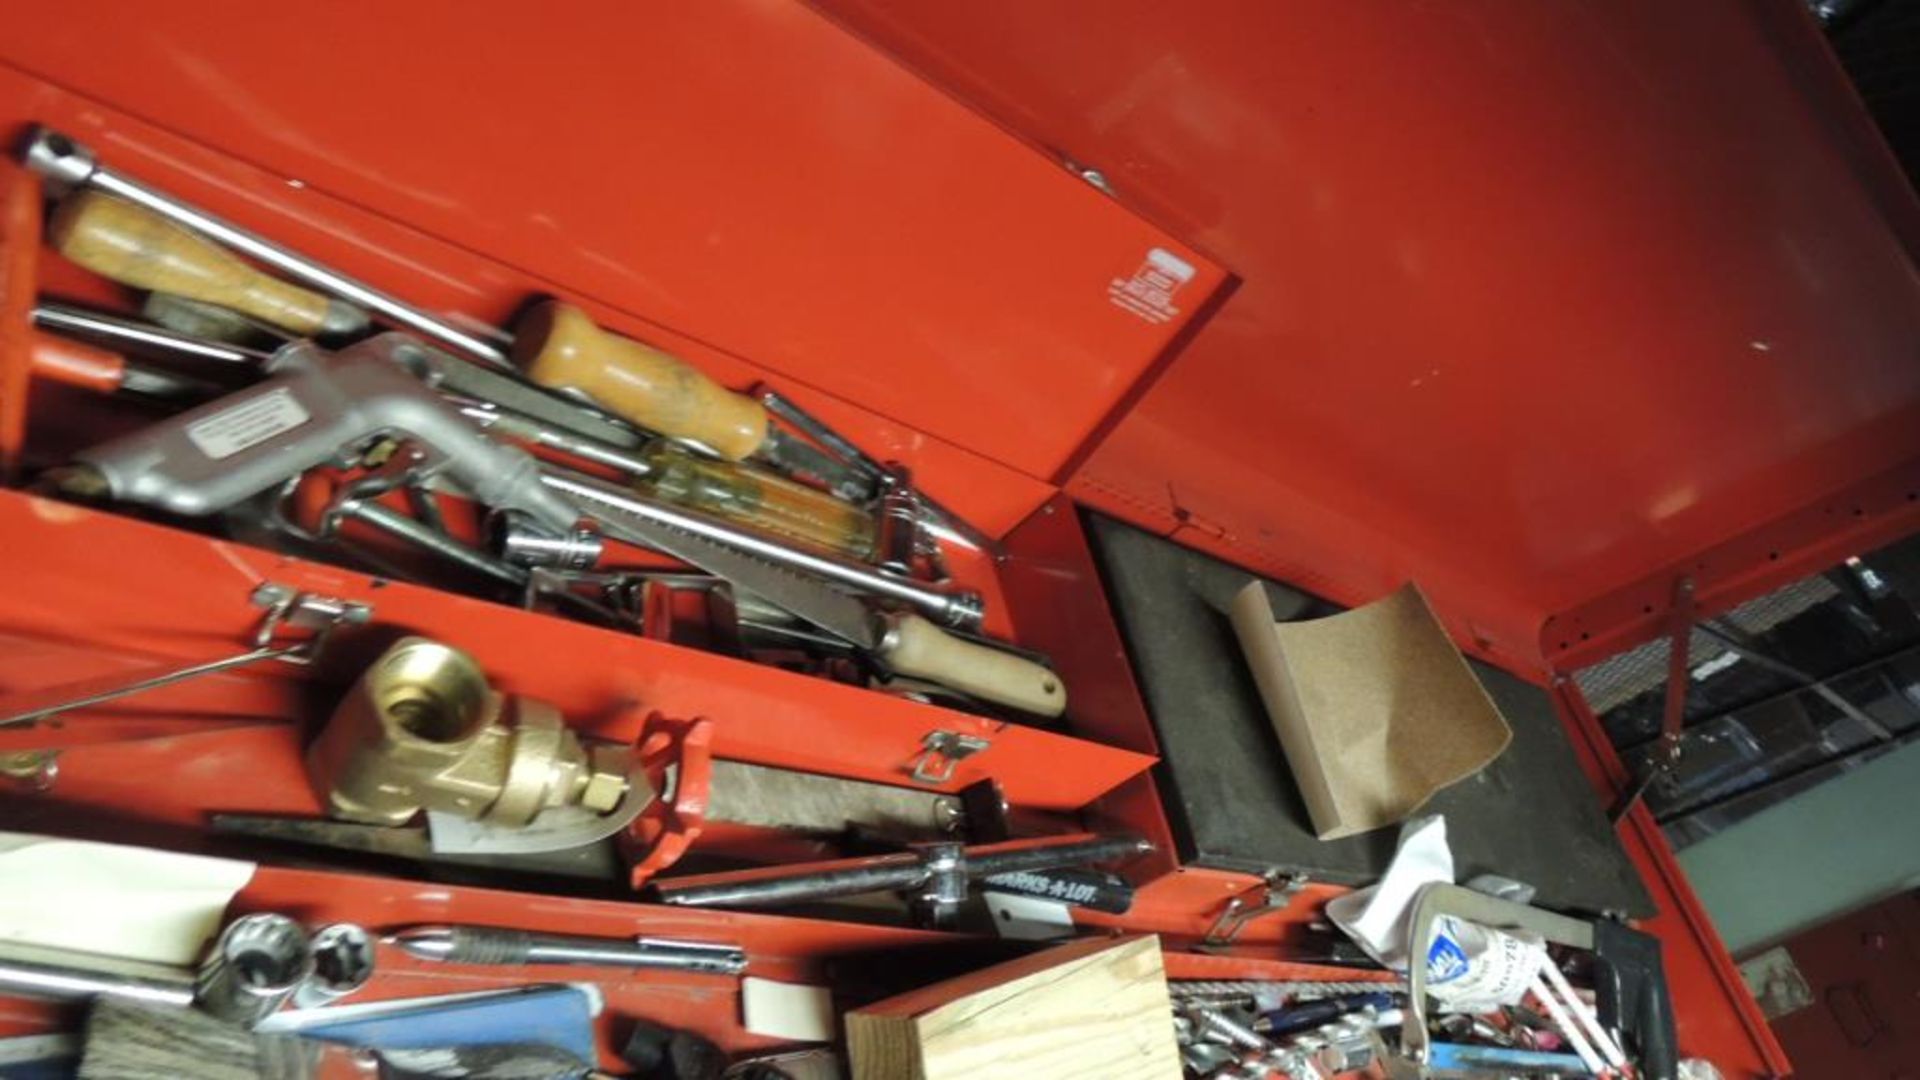 Craftsman Tool box; 23 drawer rolling tool box, sockets, screw drivers, Williams box end wrenches, - Image 11 of 11